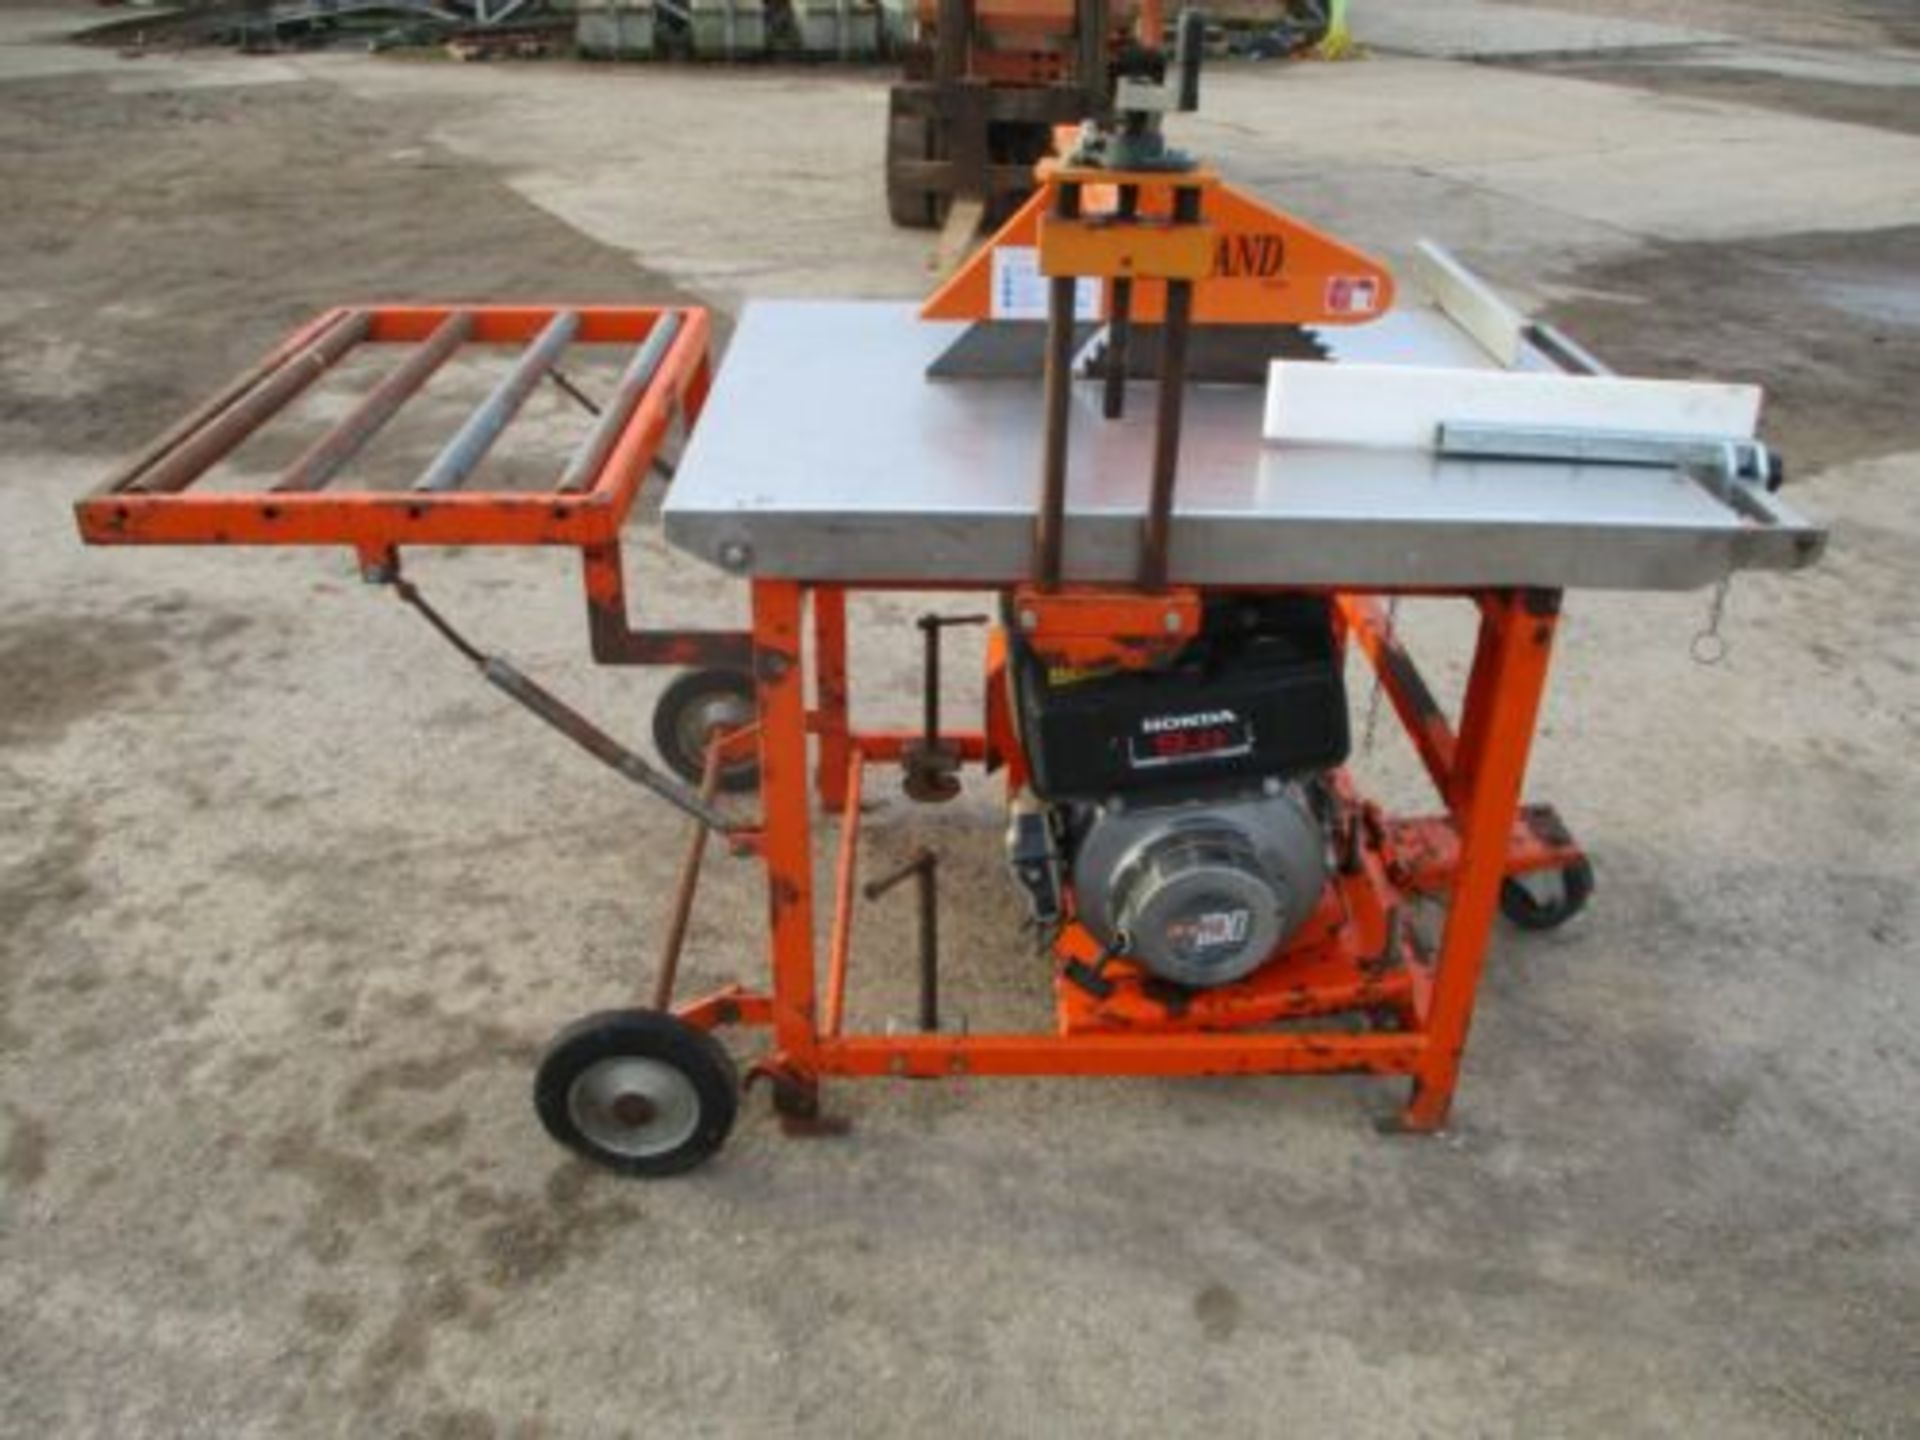 RED BAND WSA400 16" SITE WOOD SAW BENCH HONDA DIESEL ELECTRIC START